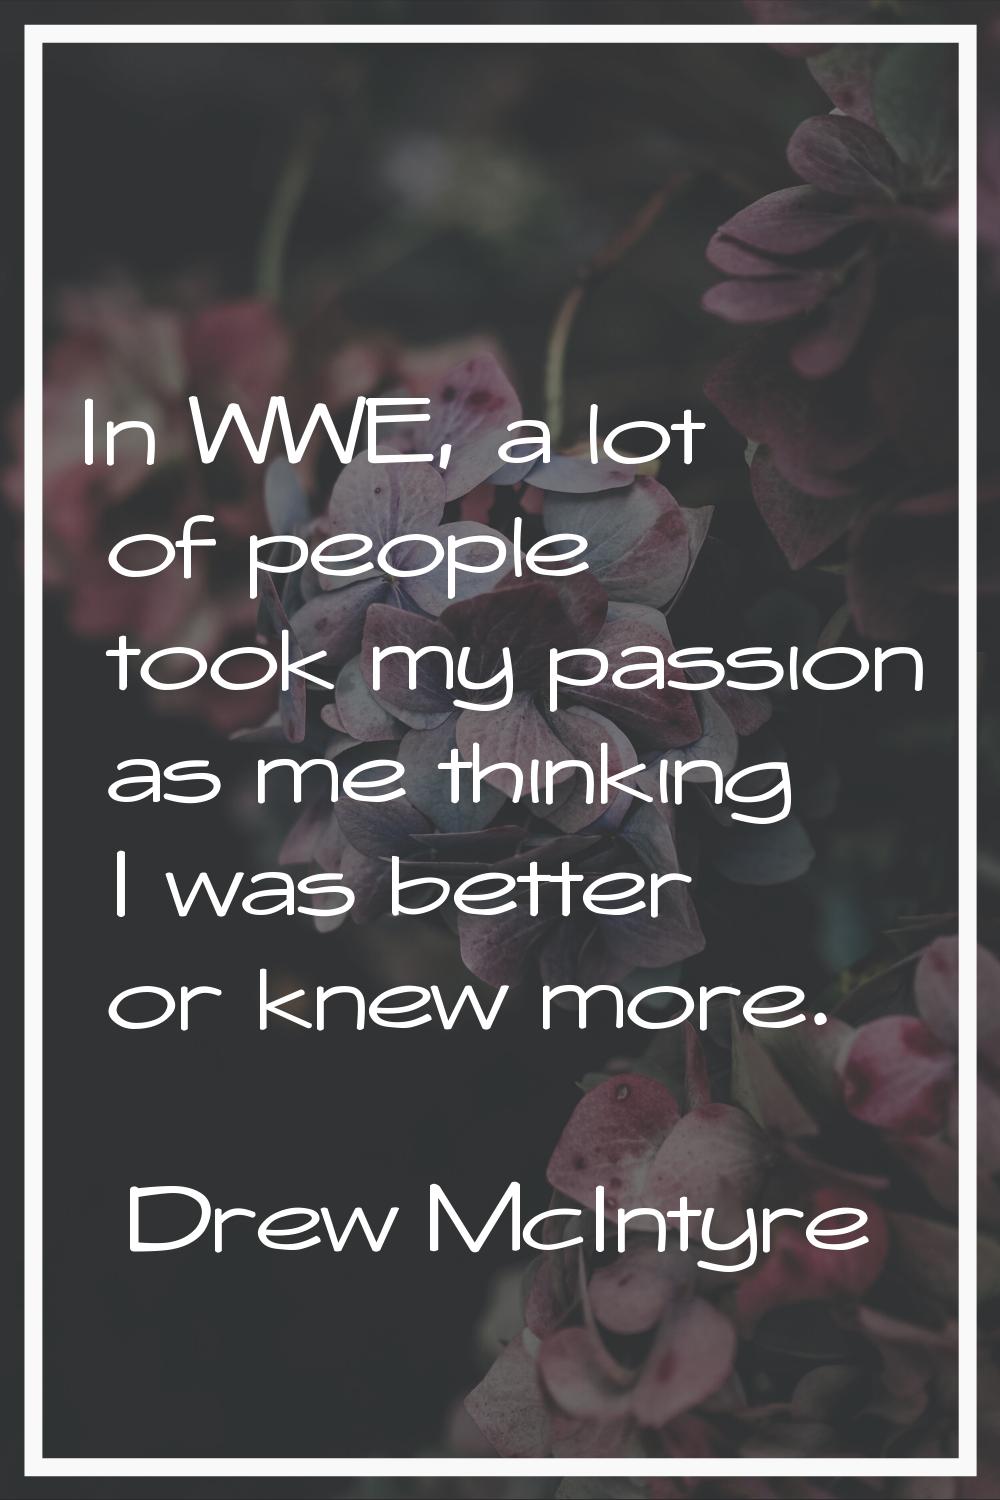 In WWE, a lot of people took my passion as me thinking I was better or knew more.